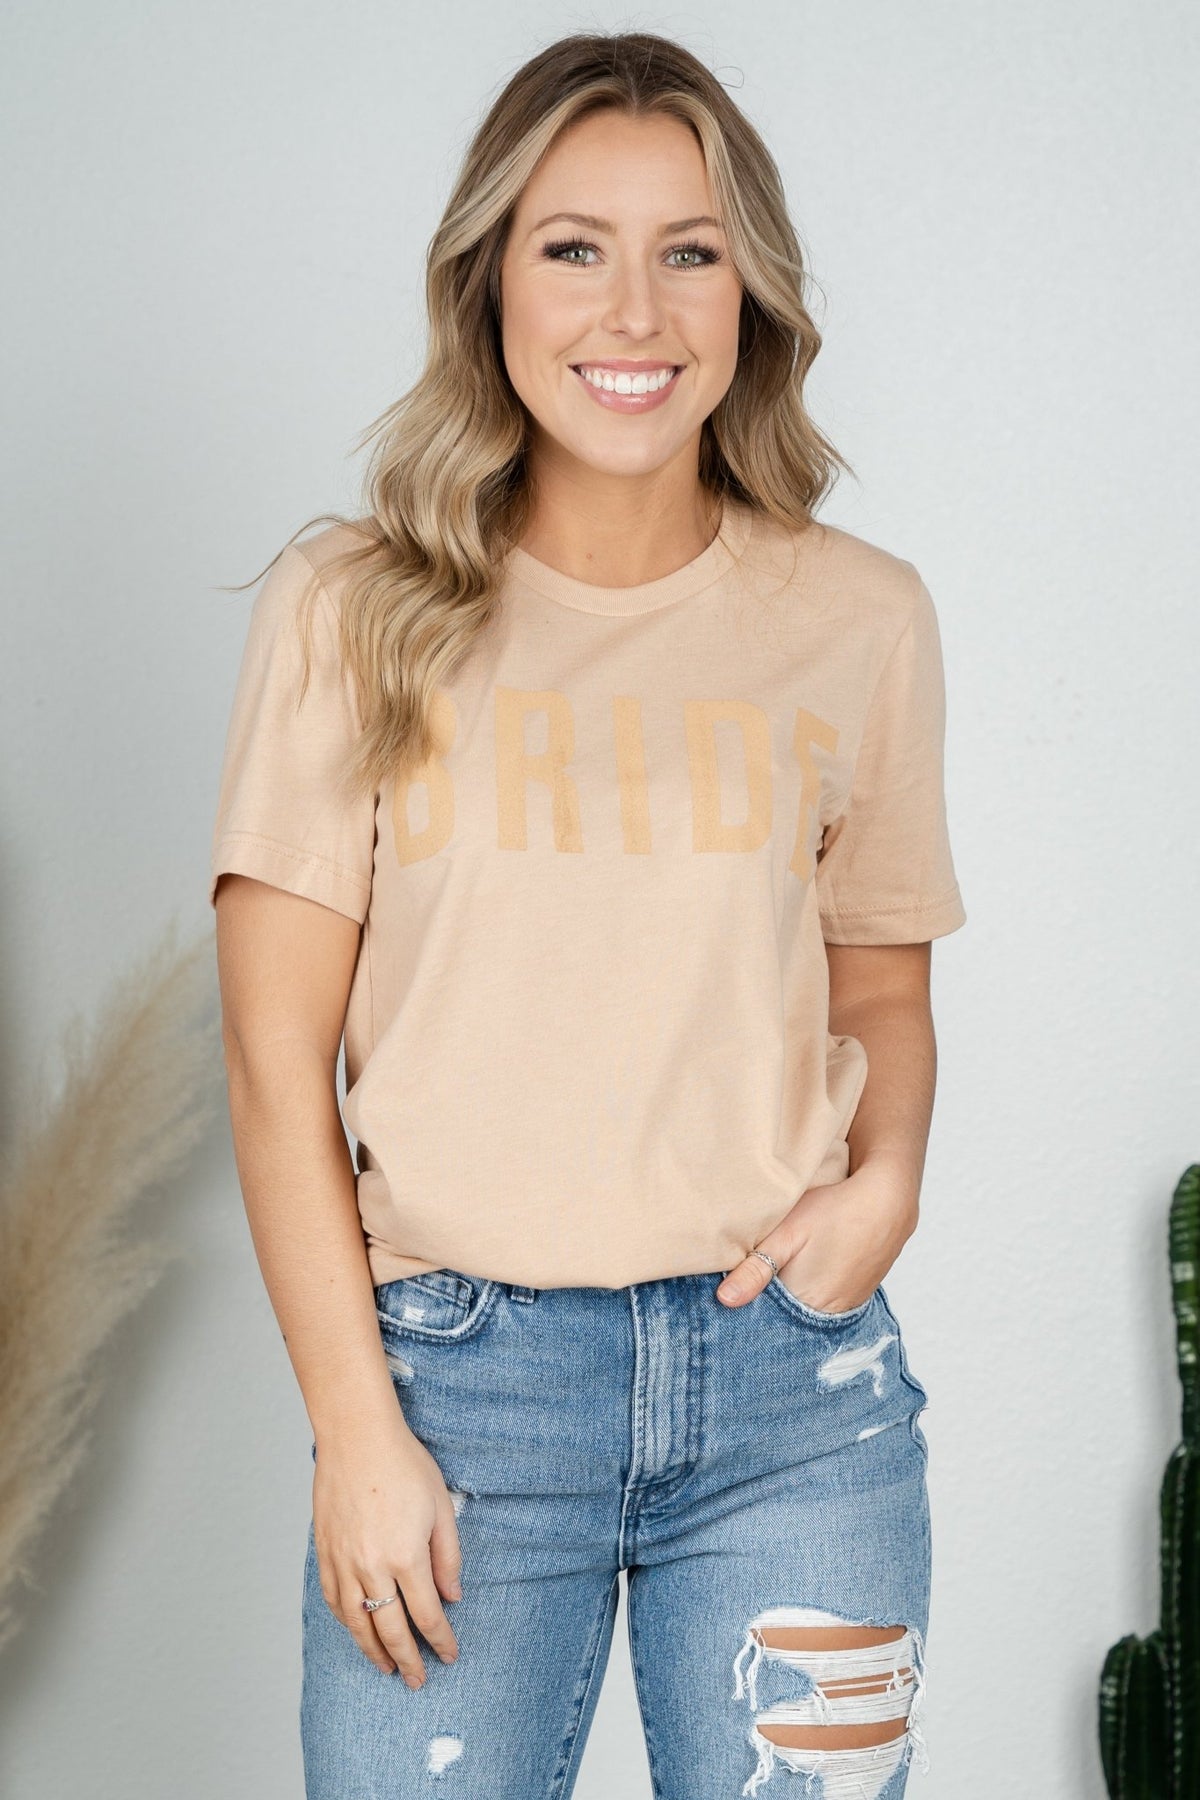 Bride tone on tone t-shirt sand dune - Cute T-shirts - Trendy Graphic T-Shirts at Lush Fashion Lounge Boutique in Oklahoma City